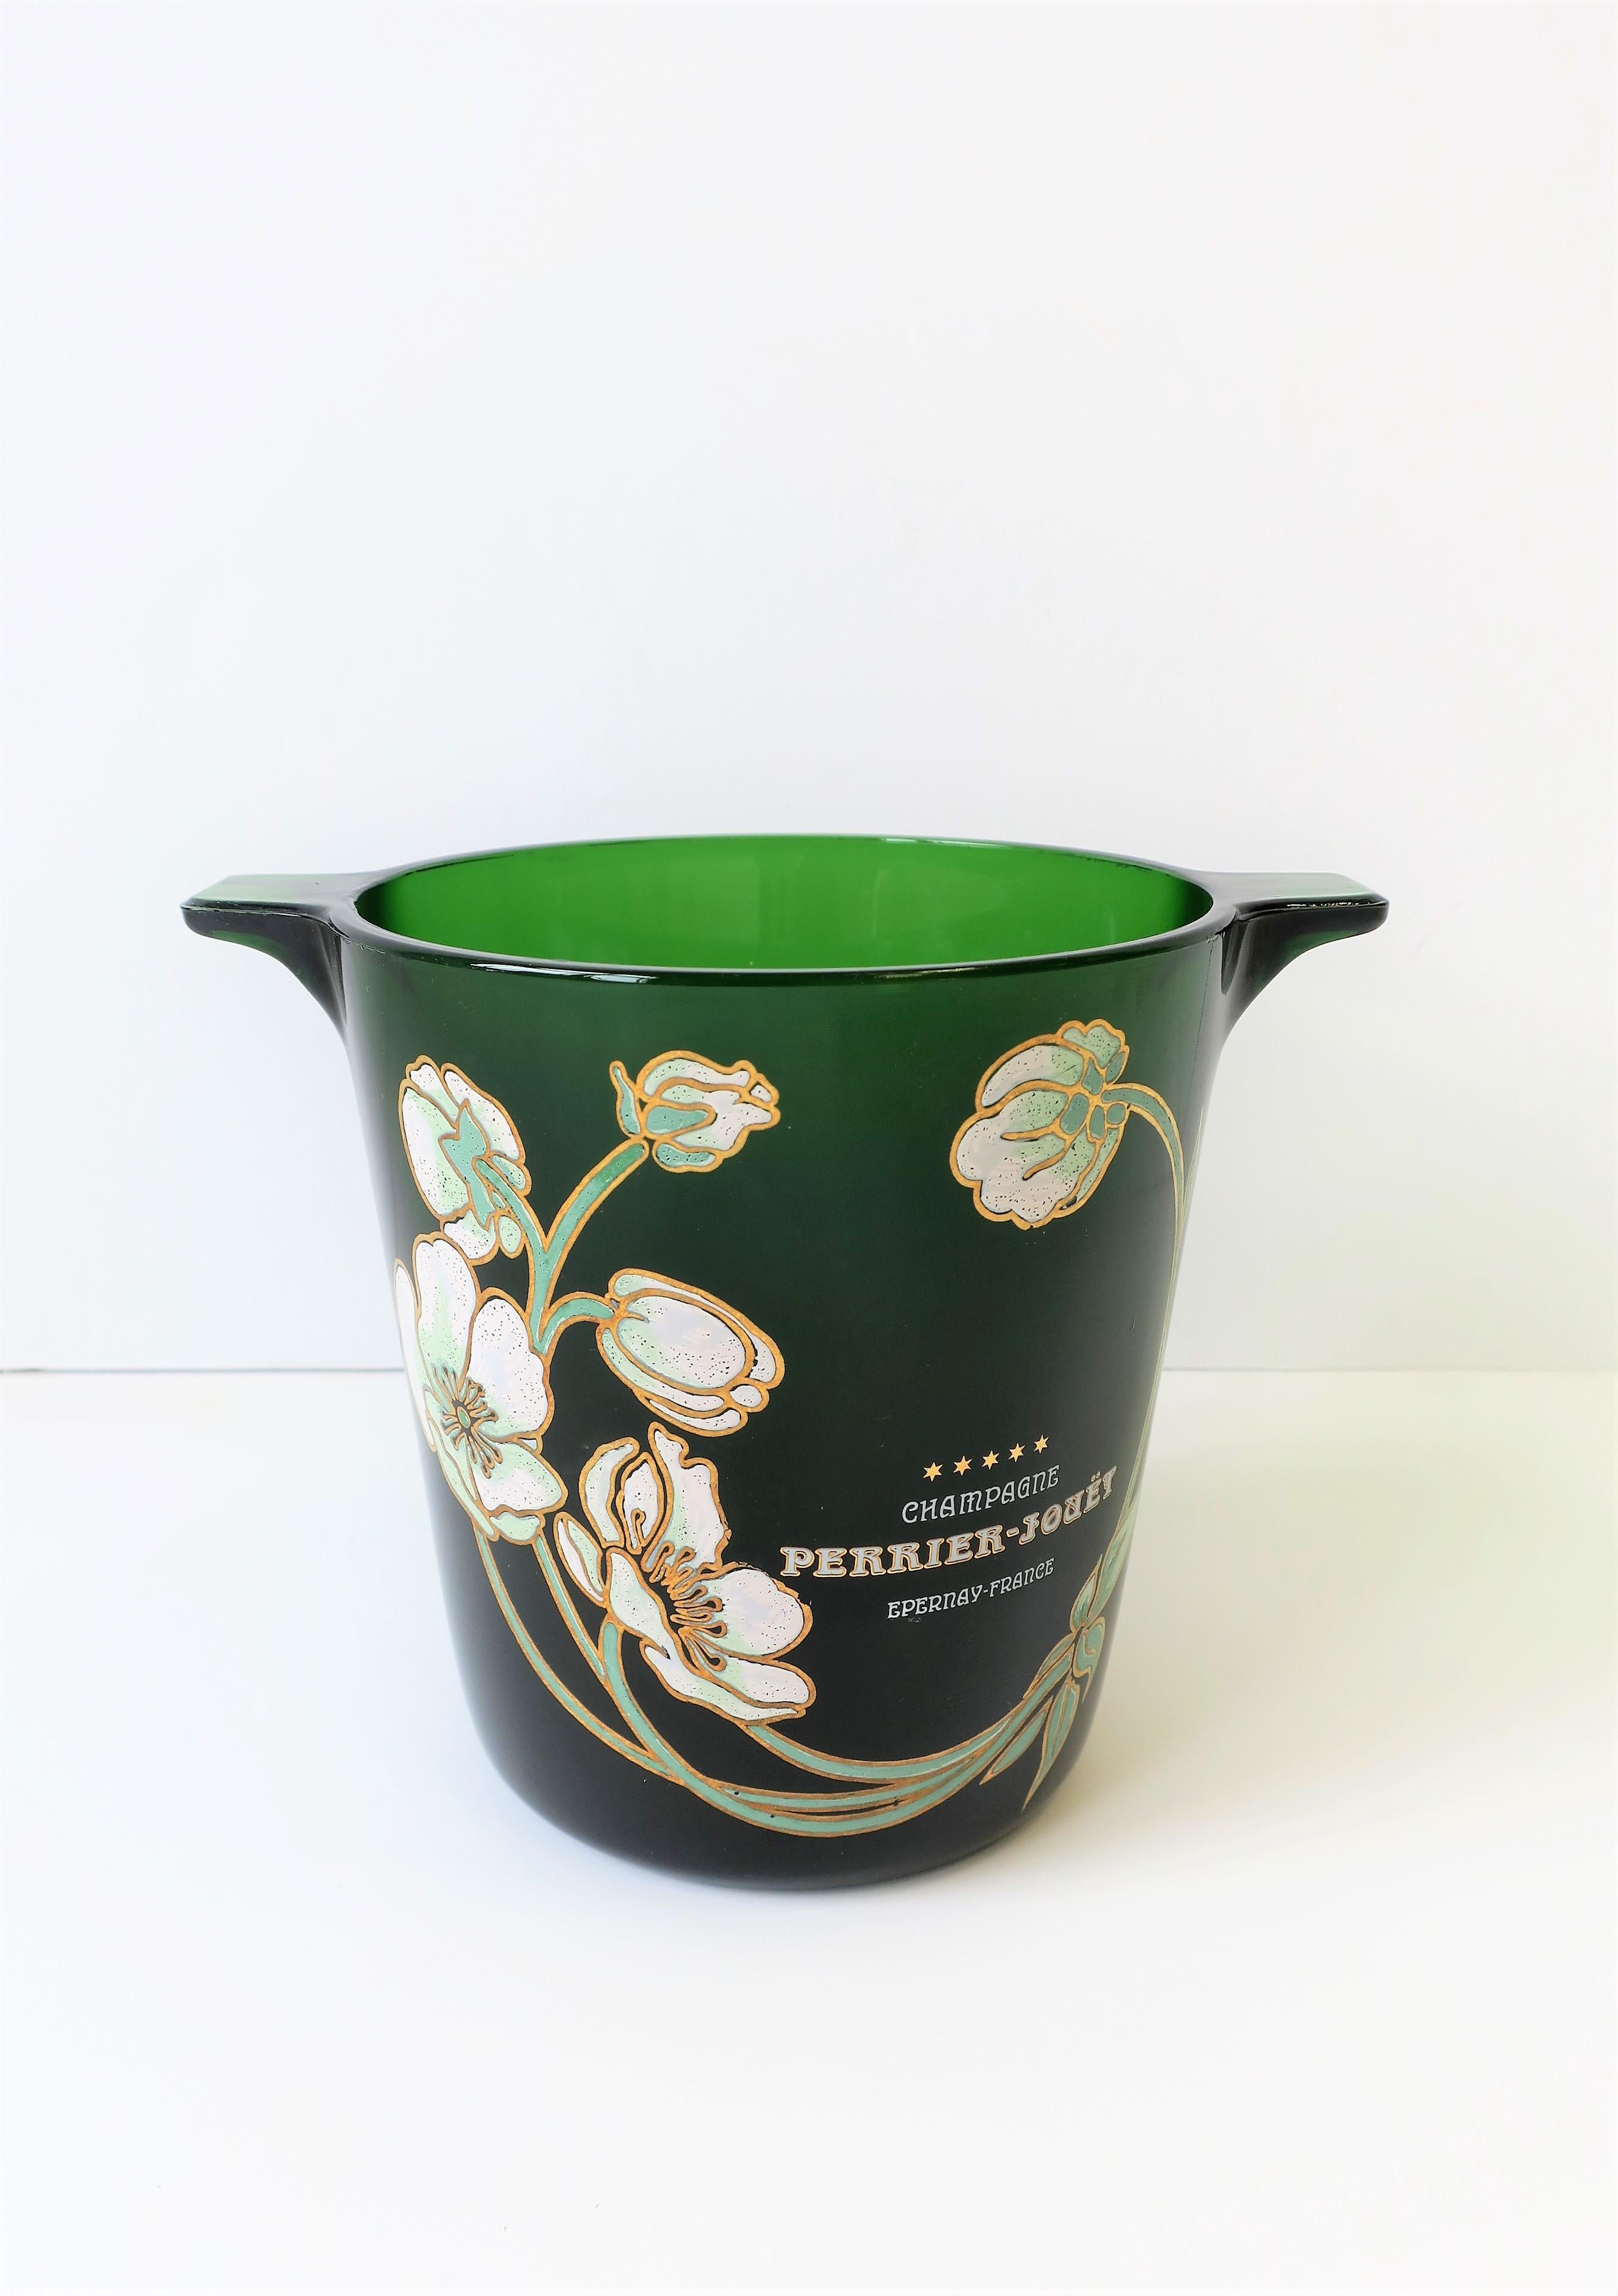 A very beautiful vintage Perrier-Jouet French Champagne bucket with iconic floral motif in the Art Nouveau style. Piece is substantial emerald green glass with raised relief on front. Bucket can be used as an 'ice bucket' or as a Champagne/wine